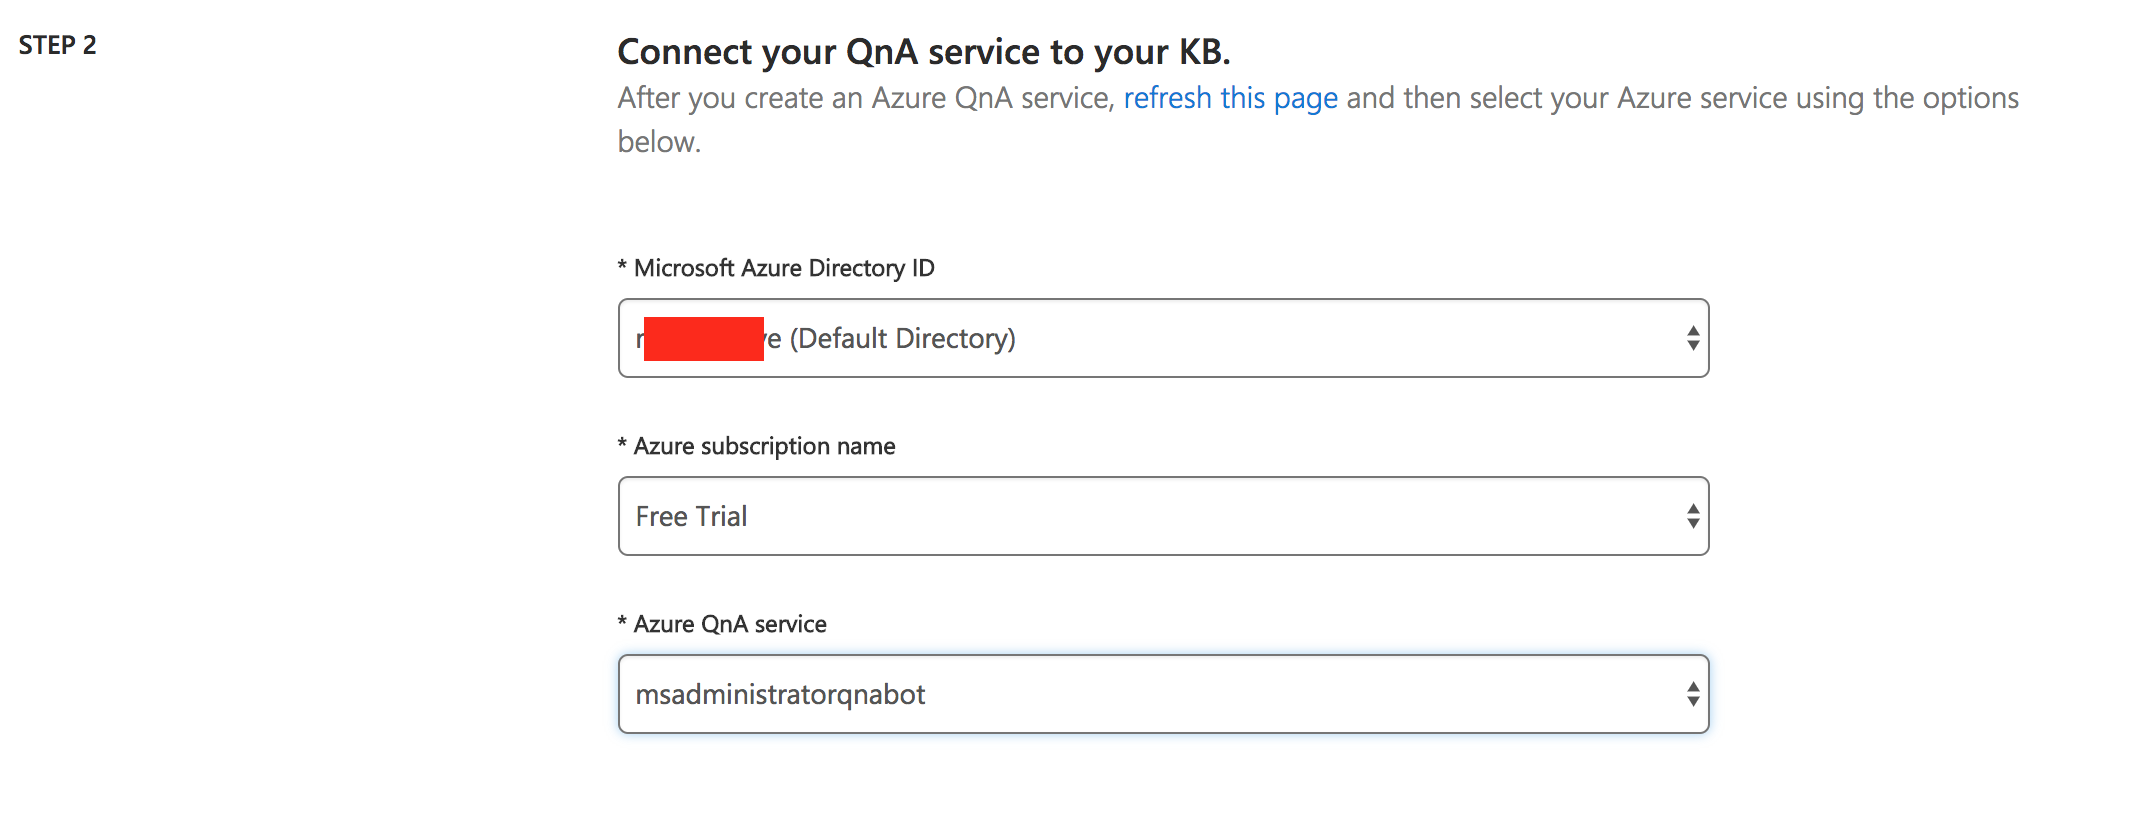 Select your Microsoft Azure account, subscription name, and the recently created QnA service